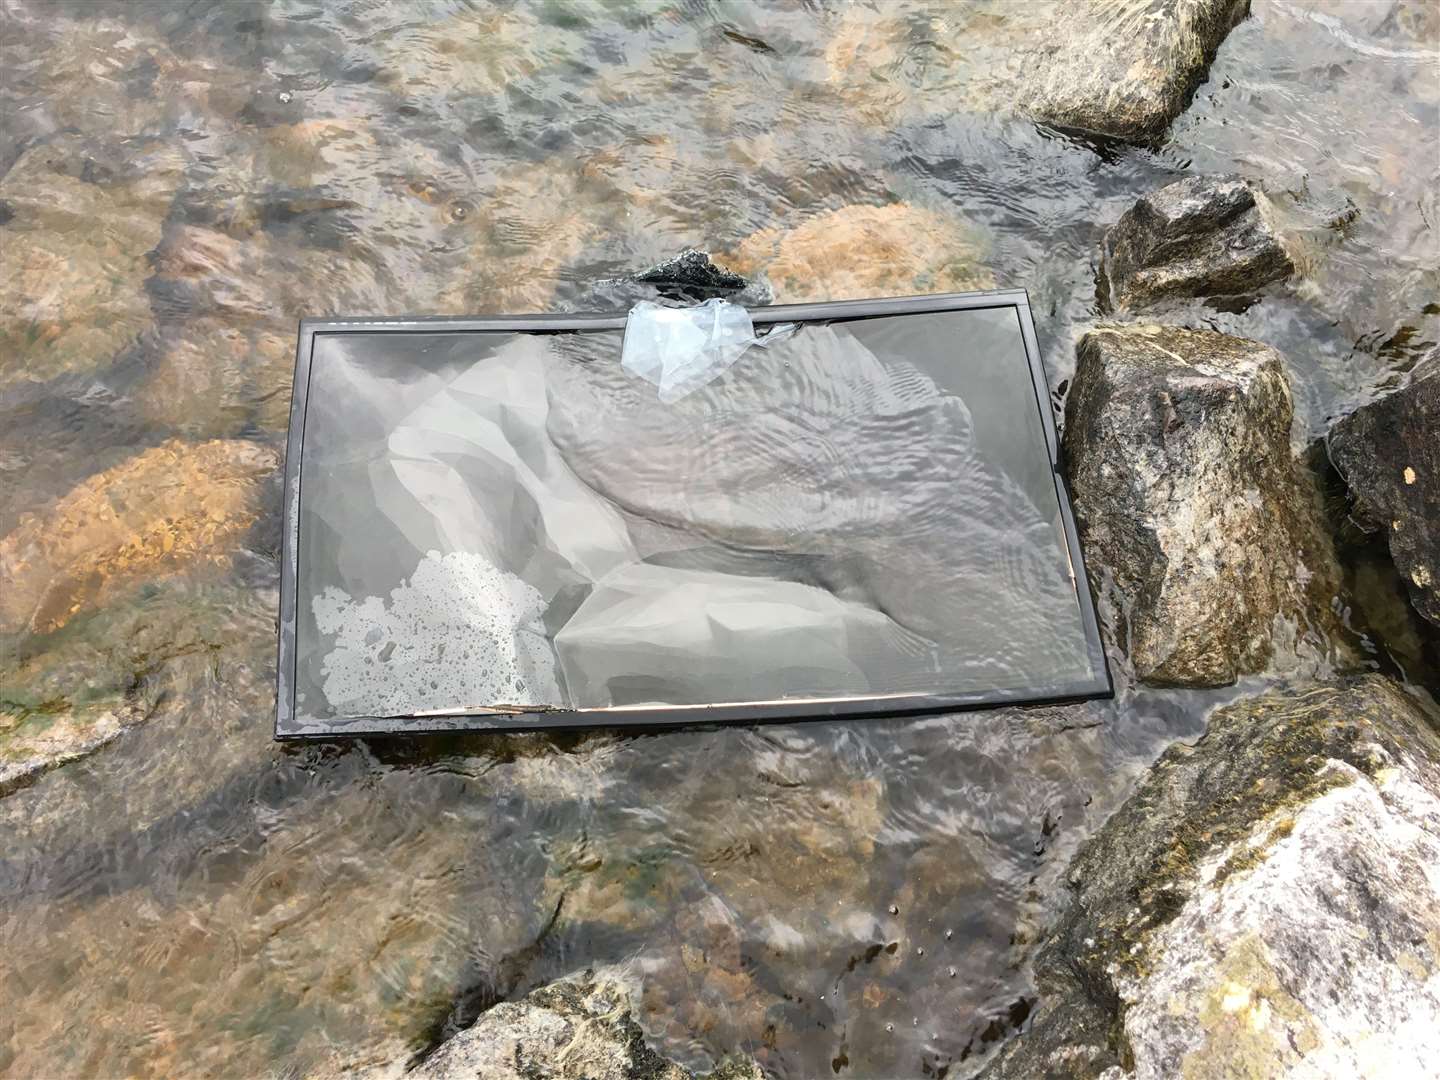 A television was pictured floating in the waters of Loch Ness.